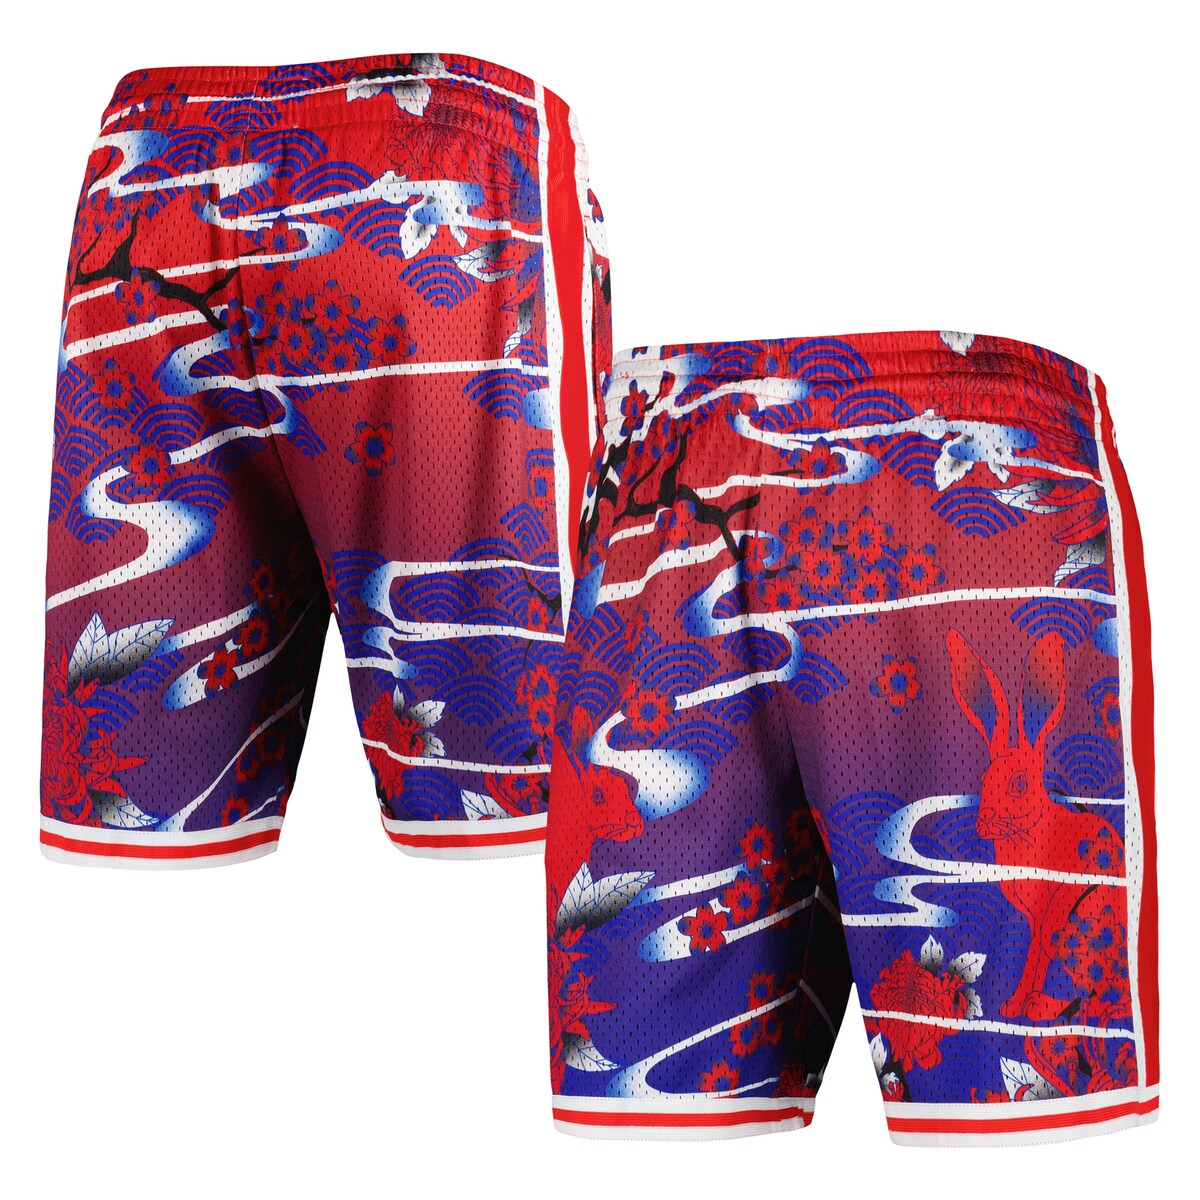 If you're looking for a unique addition to your Philadelphia 76ers collection, look no further than these Lunar New Year Swingman Shorts by Mitchell & Ness. They feature team colors paired with a unique Lunar New Year design that offer an eye catching way to support your Philadelphia 76ers. Additionally, the elastic waistband and mesh fabric make for a comfortable fit every time you sport these shorts.Elastic waistband with drawstringImportedMaterial: 100% PolyesterOfficially licensedMesh fabricBrand: Mitchell & NessMachine wash, line dryInseam on size M measures approx. 8.5"Tackle twill appliquesTwo side pocketsSublimated graphics